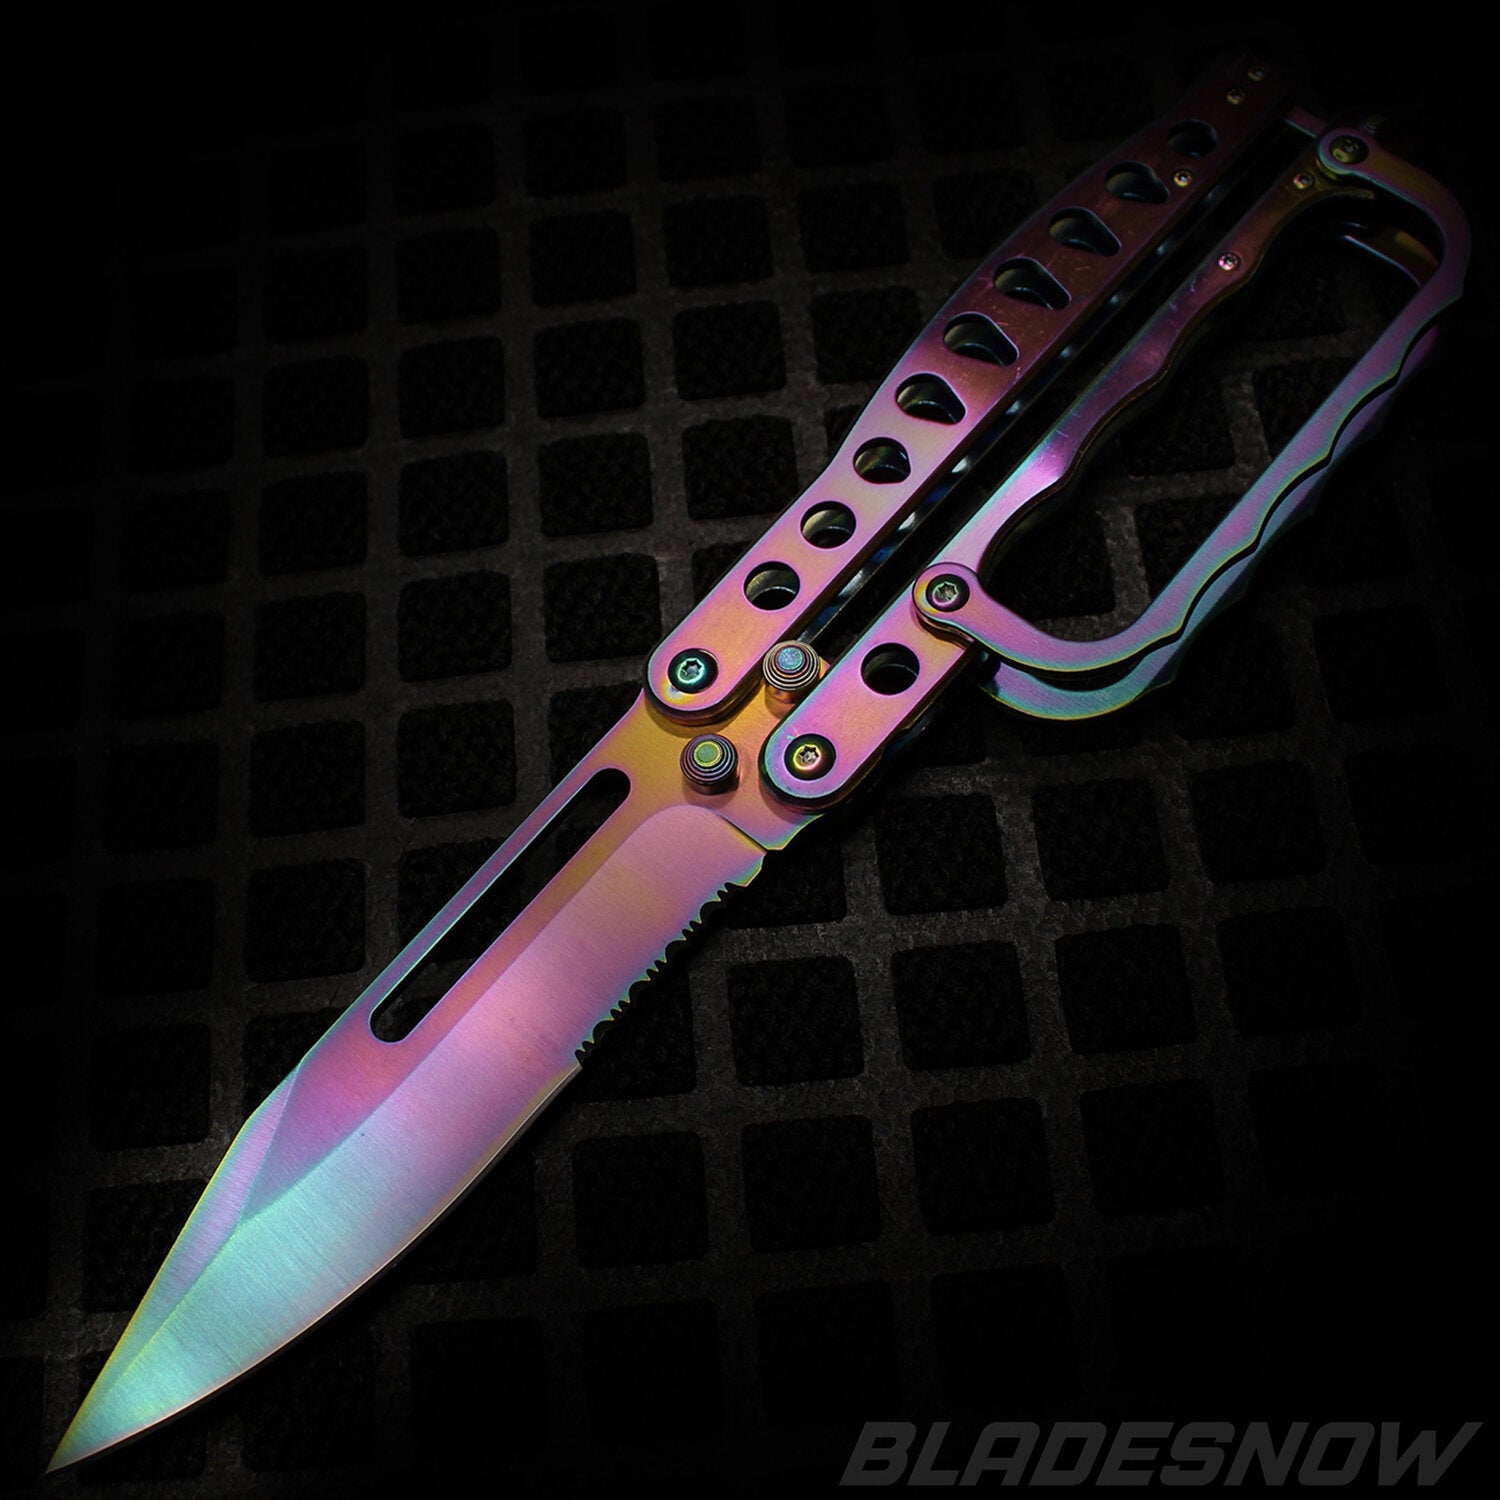 I Tested The Most Insane Butterfly Knife